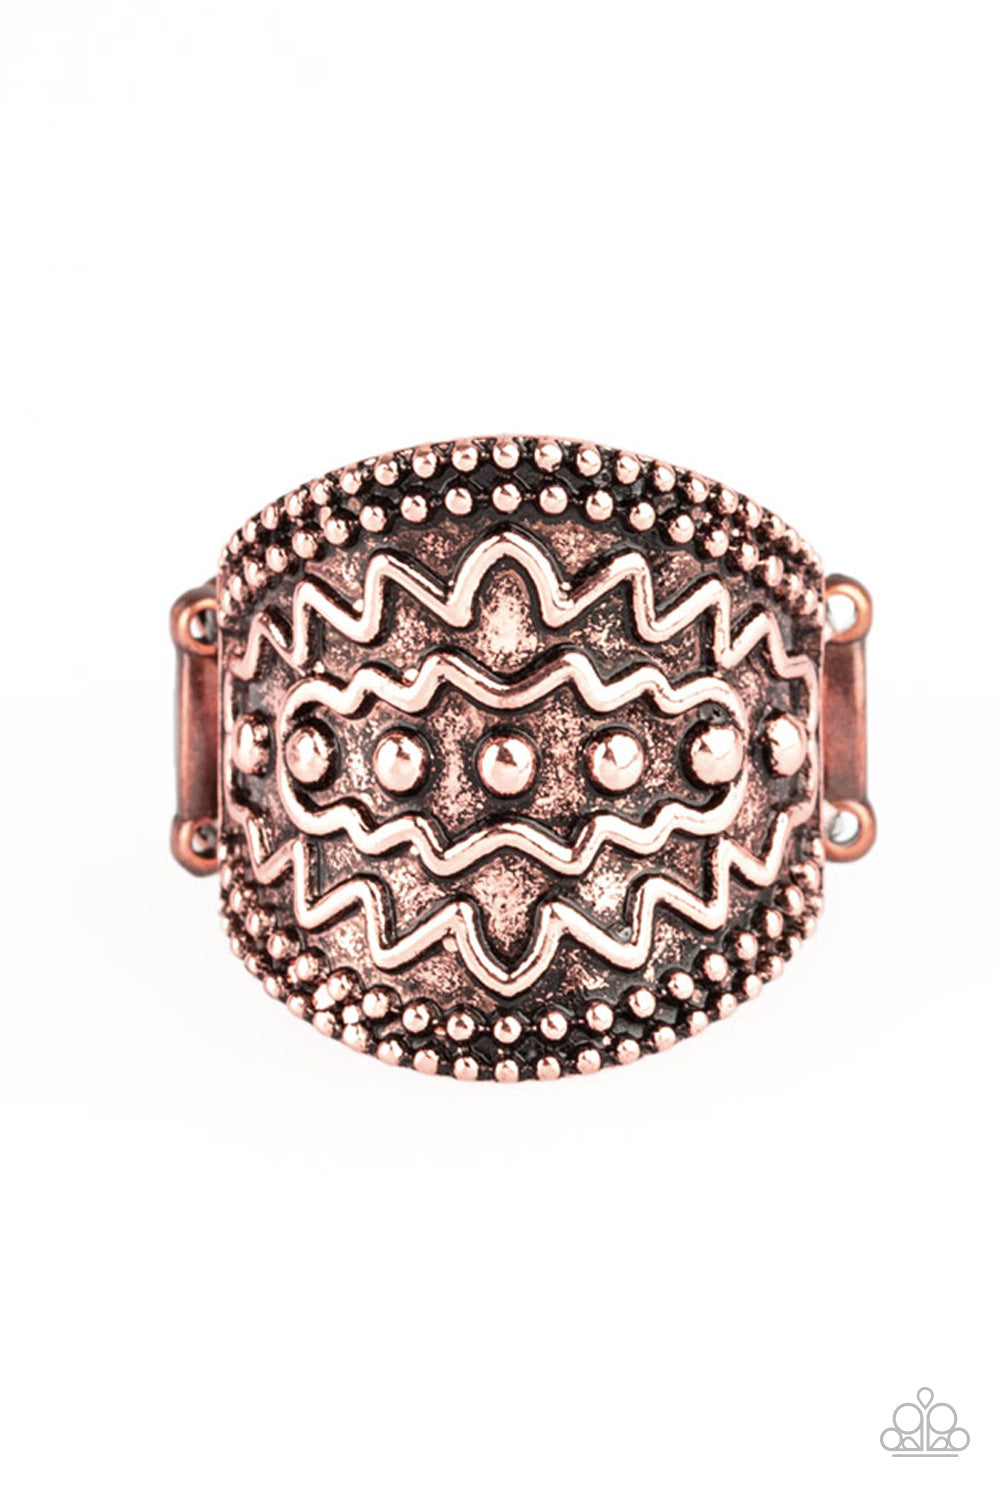 Studded and zigzagging textures are embossed across the front of a thick copper band for a tribal flair. Features a stretchy band for a flexible fit.